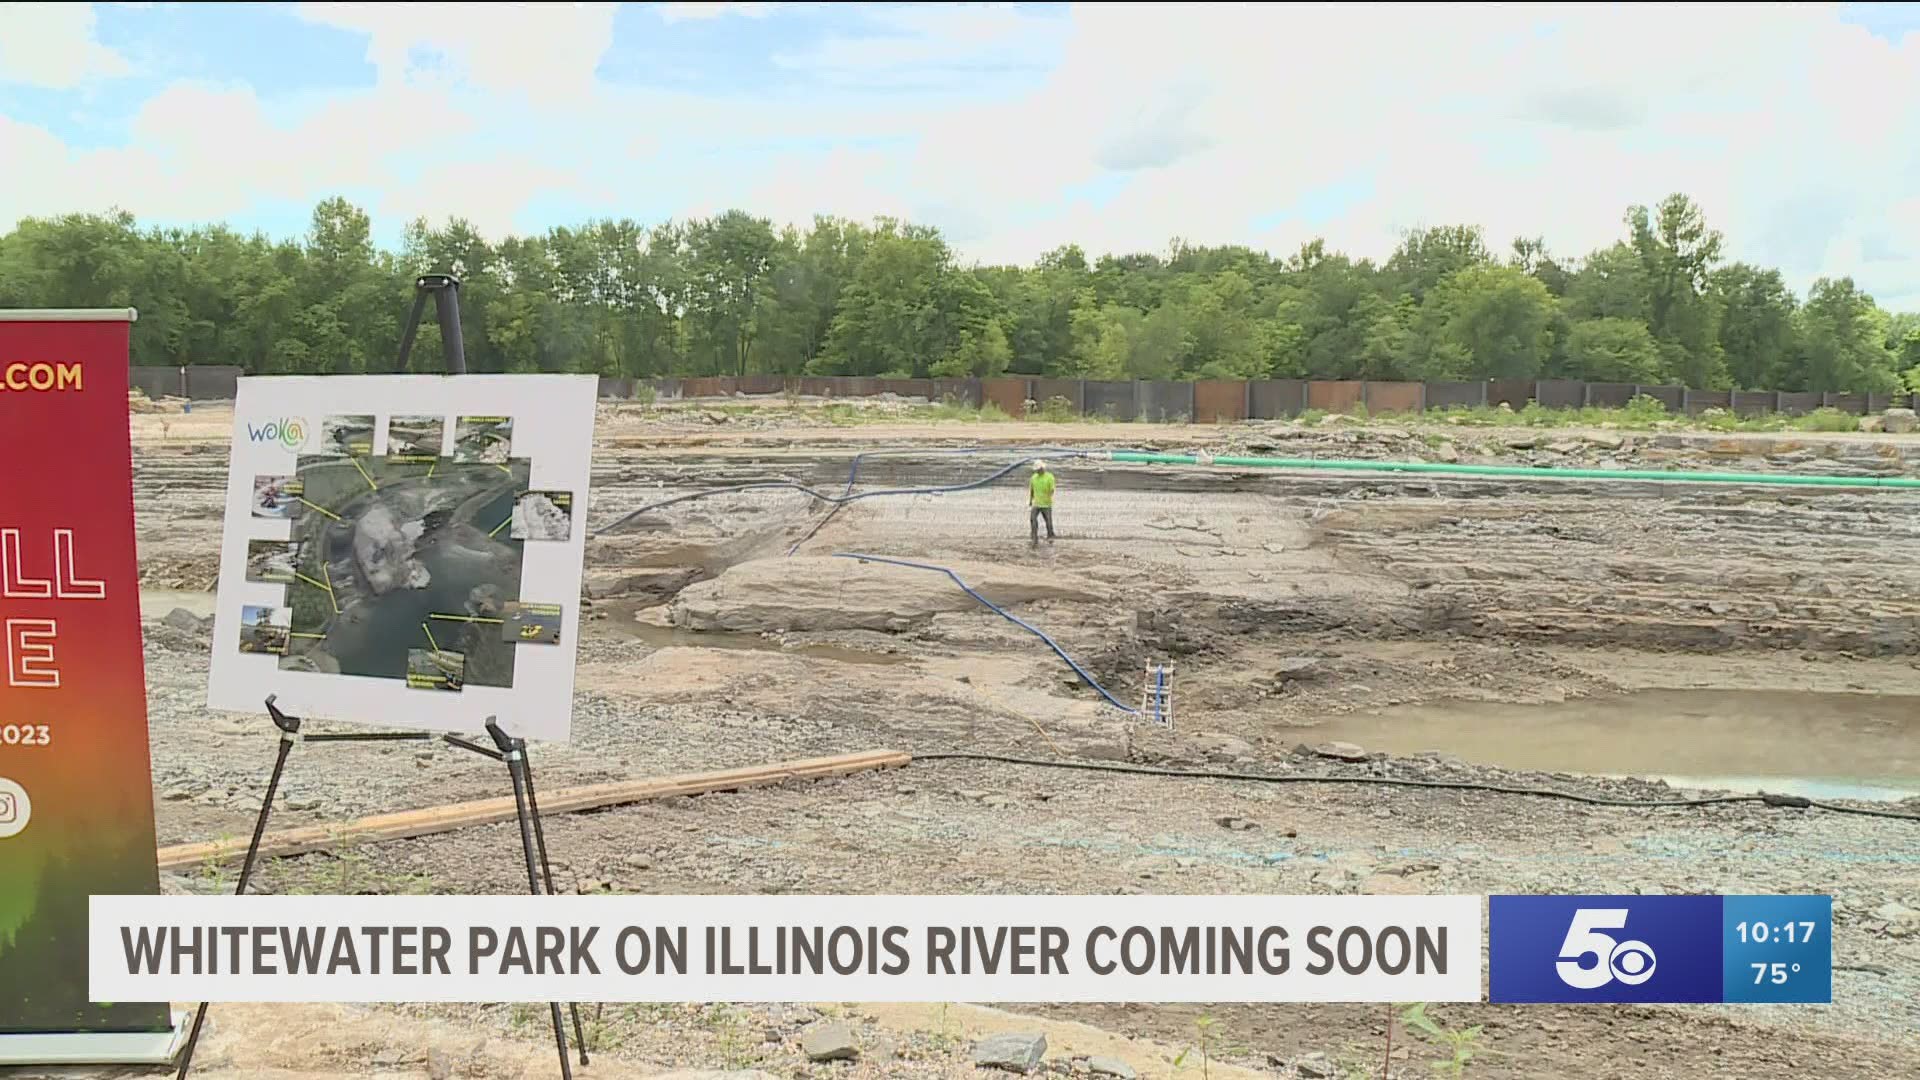 The whitewater park will not be open until 2023.